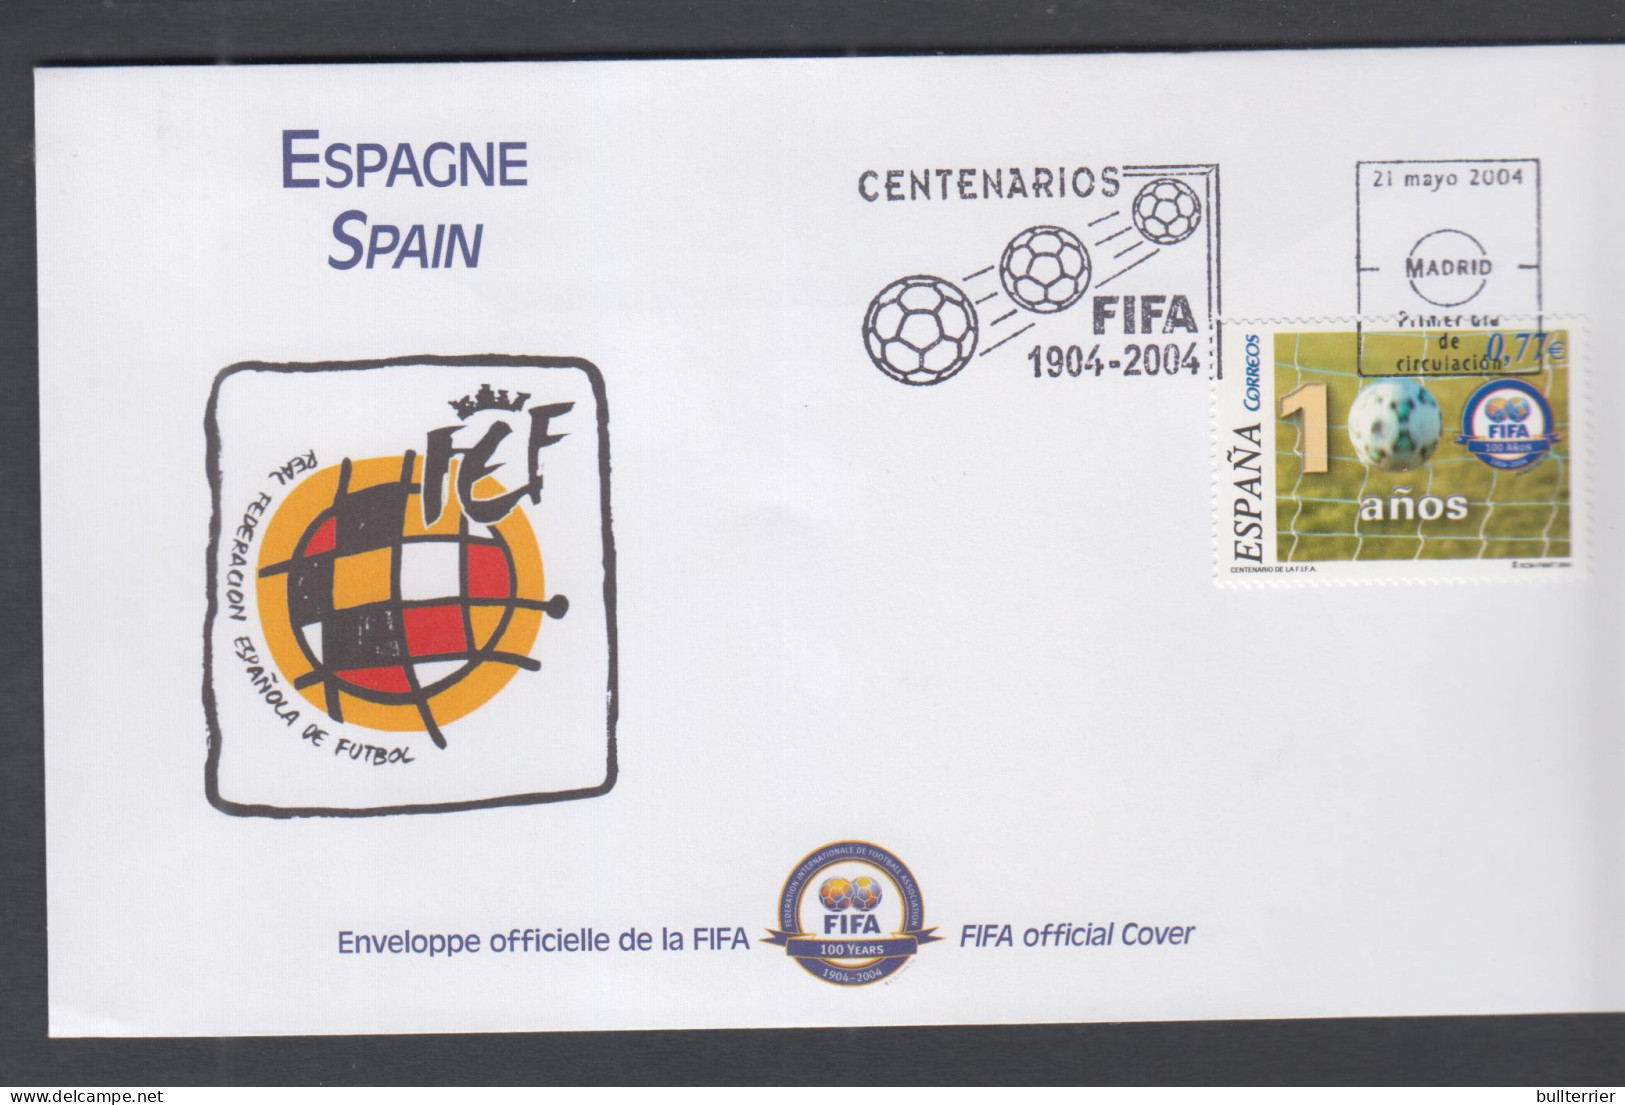 SOCCER - SPAIN  - 2004- FIFA CENTENARY   ILLUSTRATED FDC  - Covers & Documents